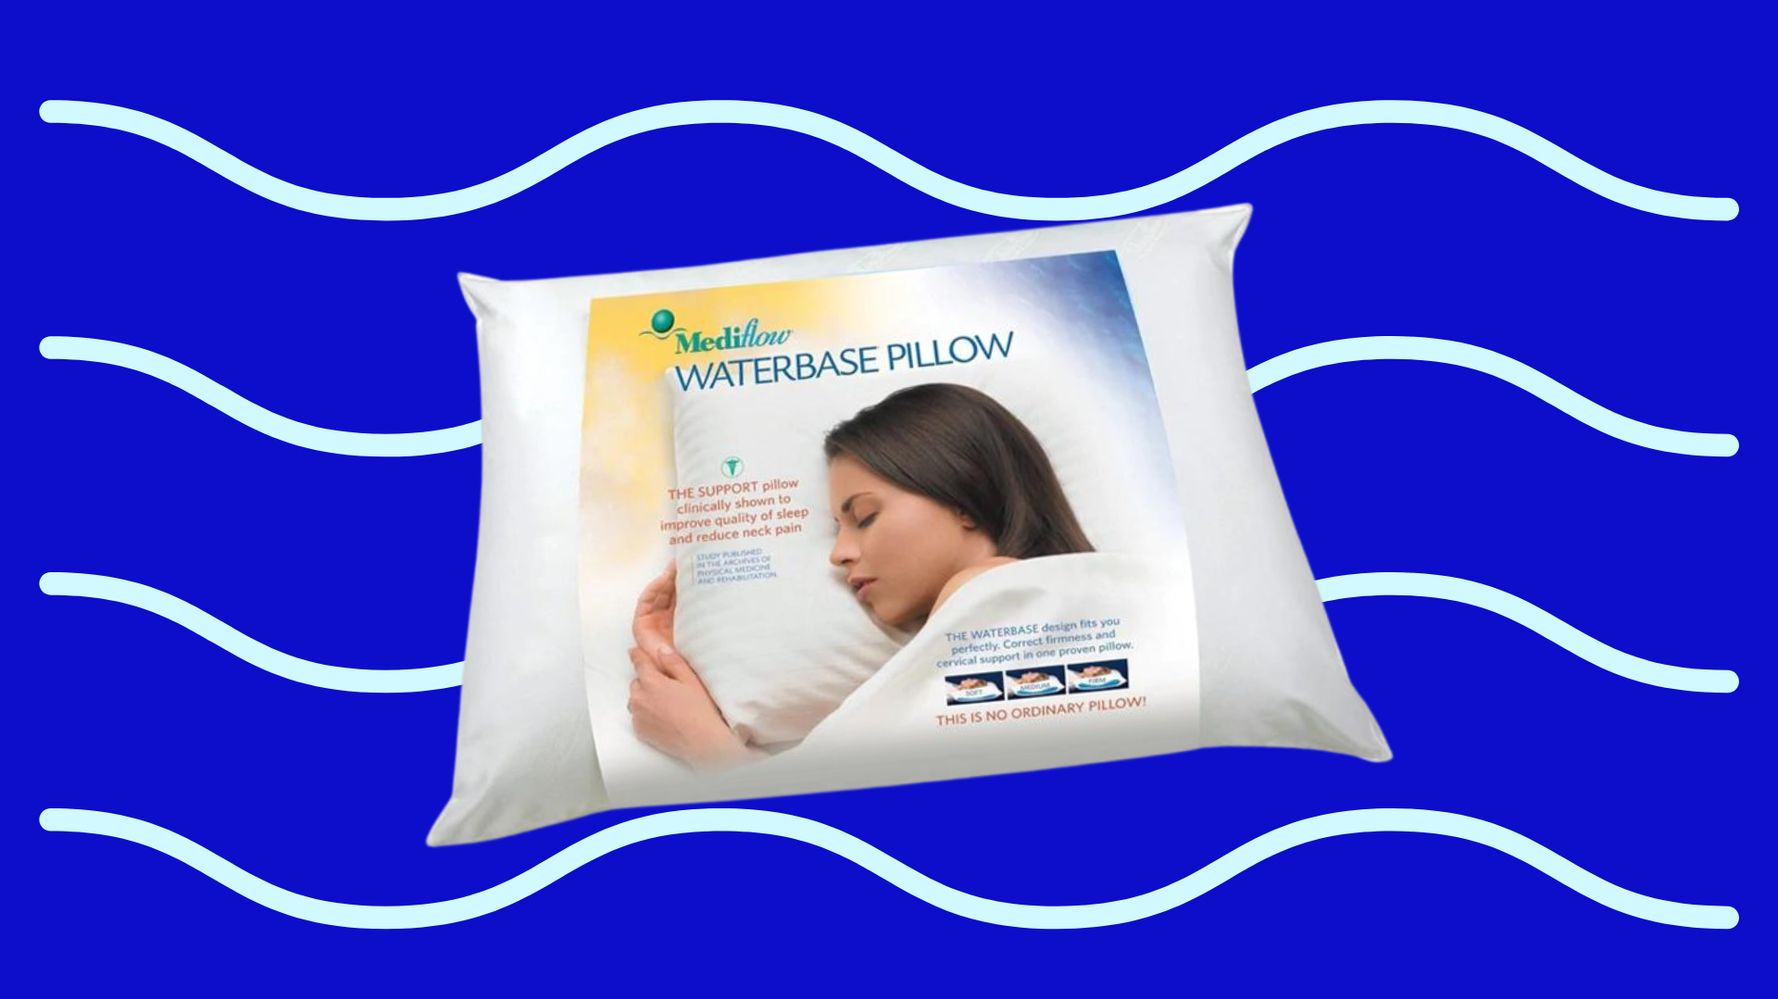 Physical Therapists Weigh In On The Water Pillows Trending On TikTok